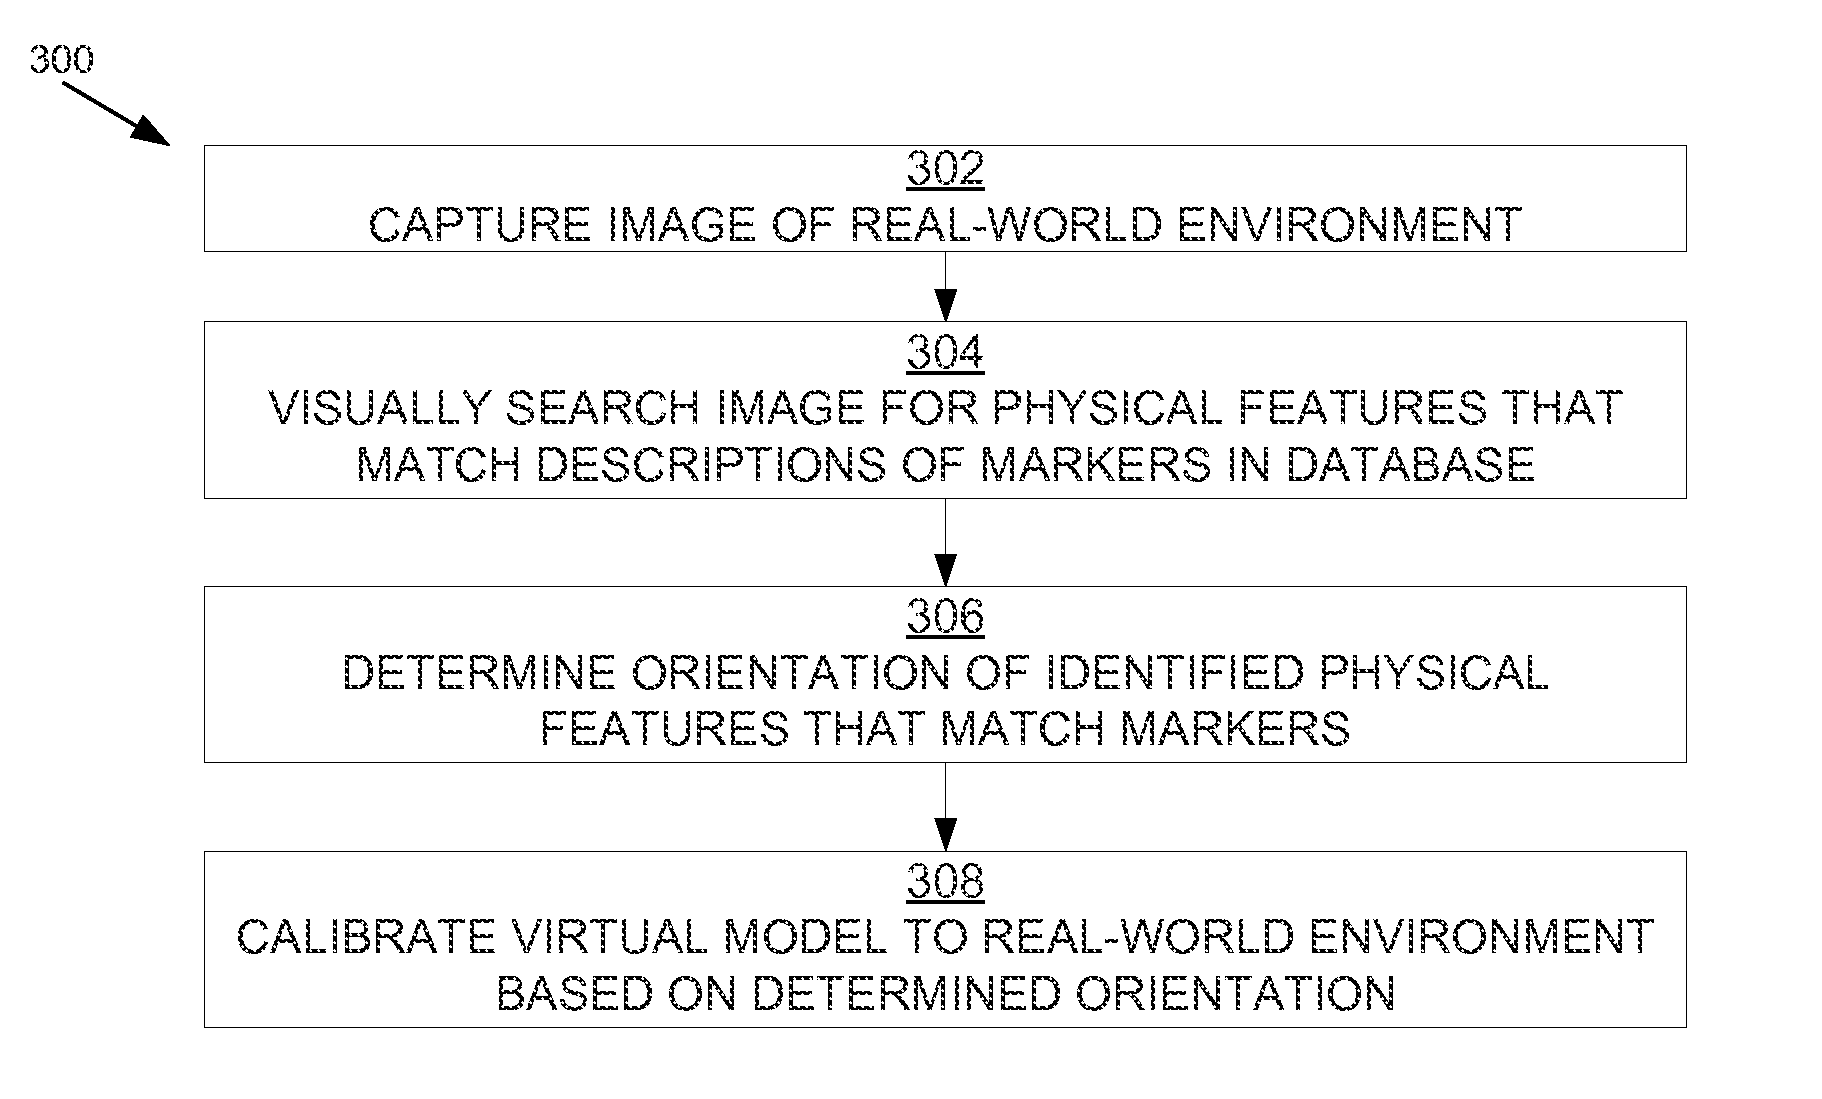 Registration between actual mobile device position and environmental model